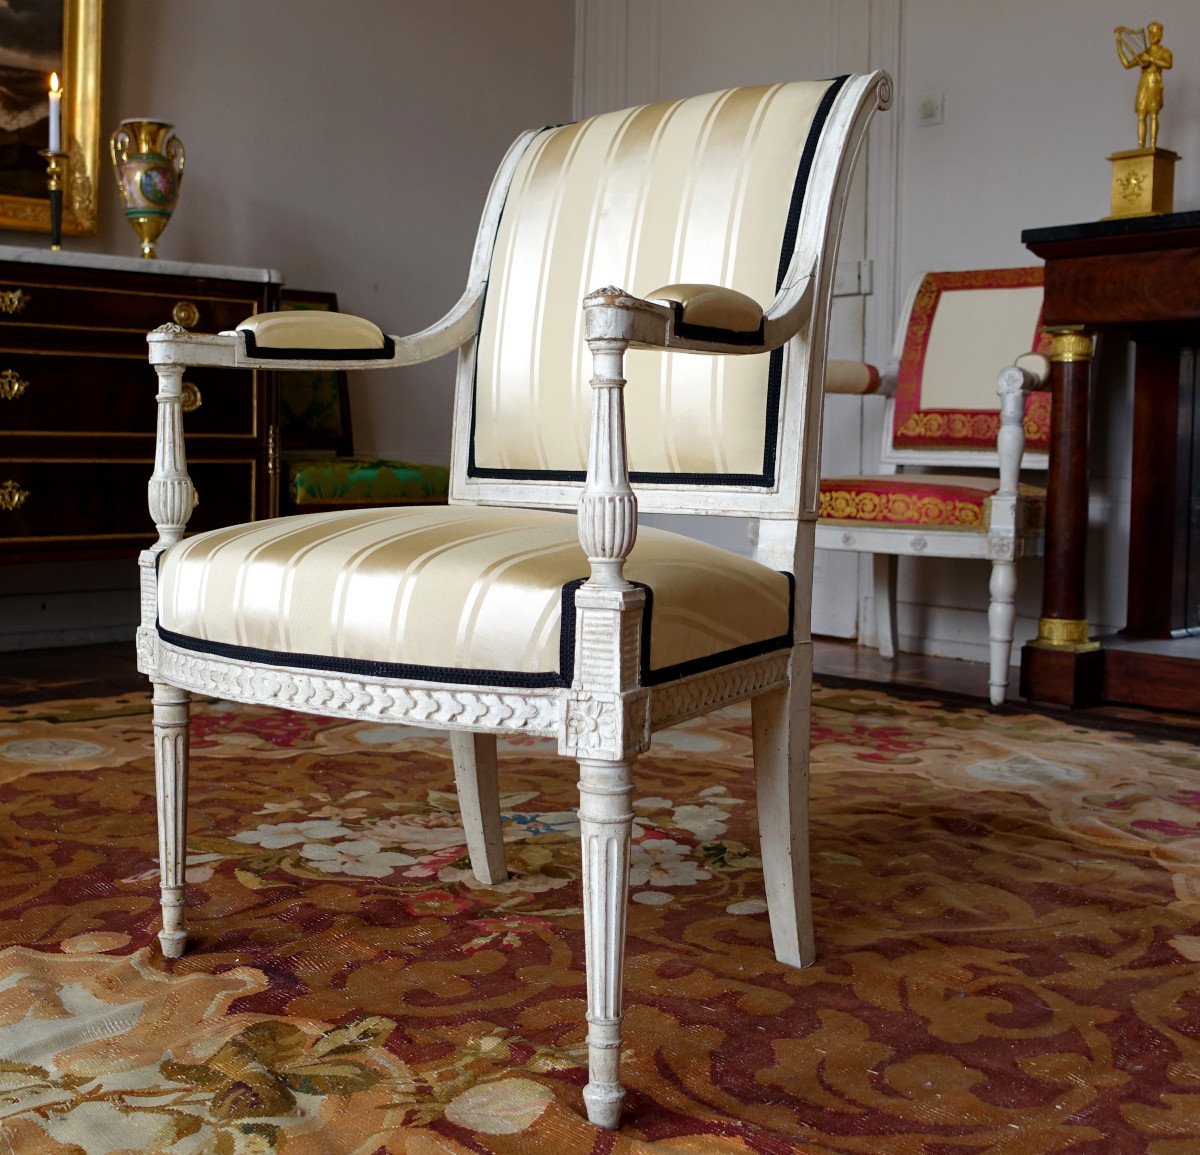 Directoire Period 5 Pieces Sitting Set  4 Armchairs And A Sofa In The Taste Of Jacob Late 18th-photo-4